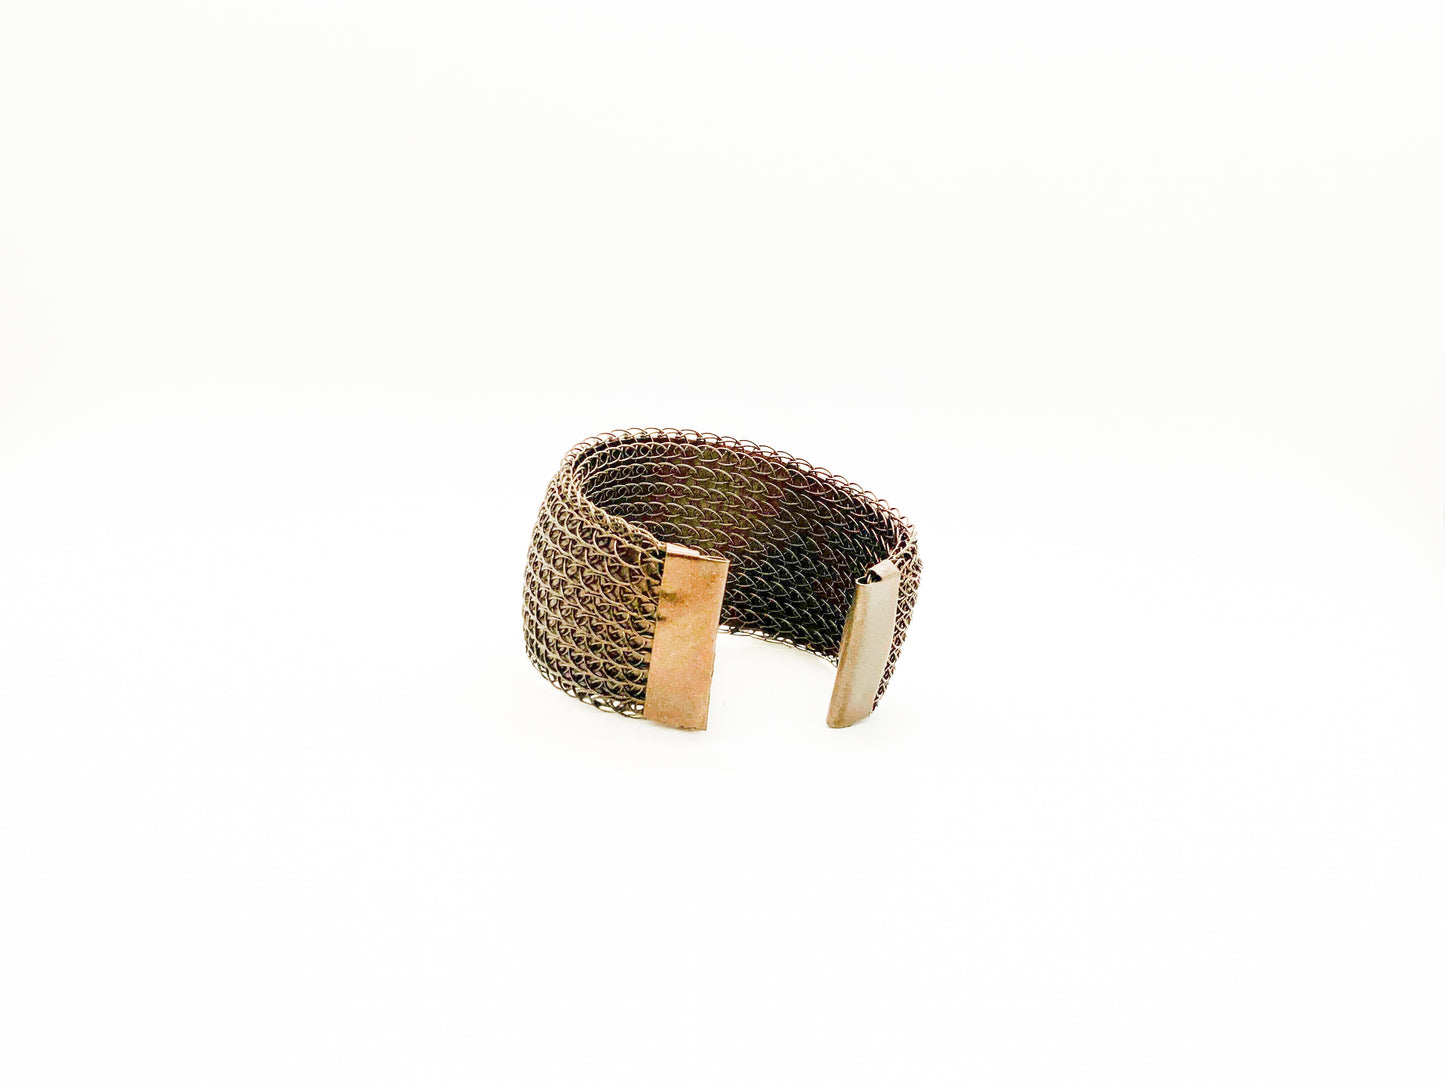 Tapered Cuff Covered with Open Knit Wire